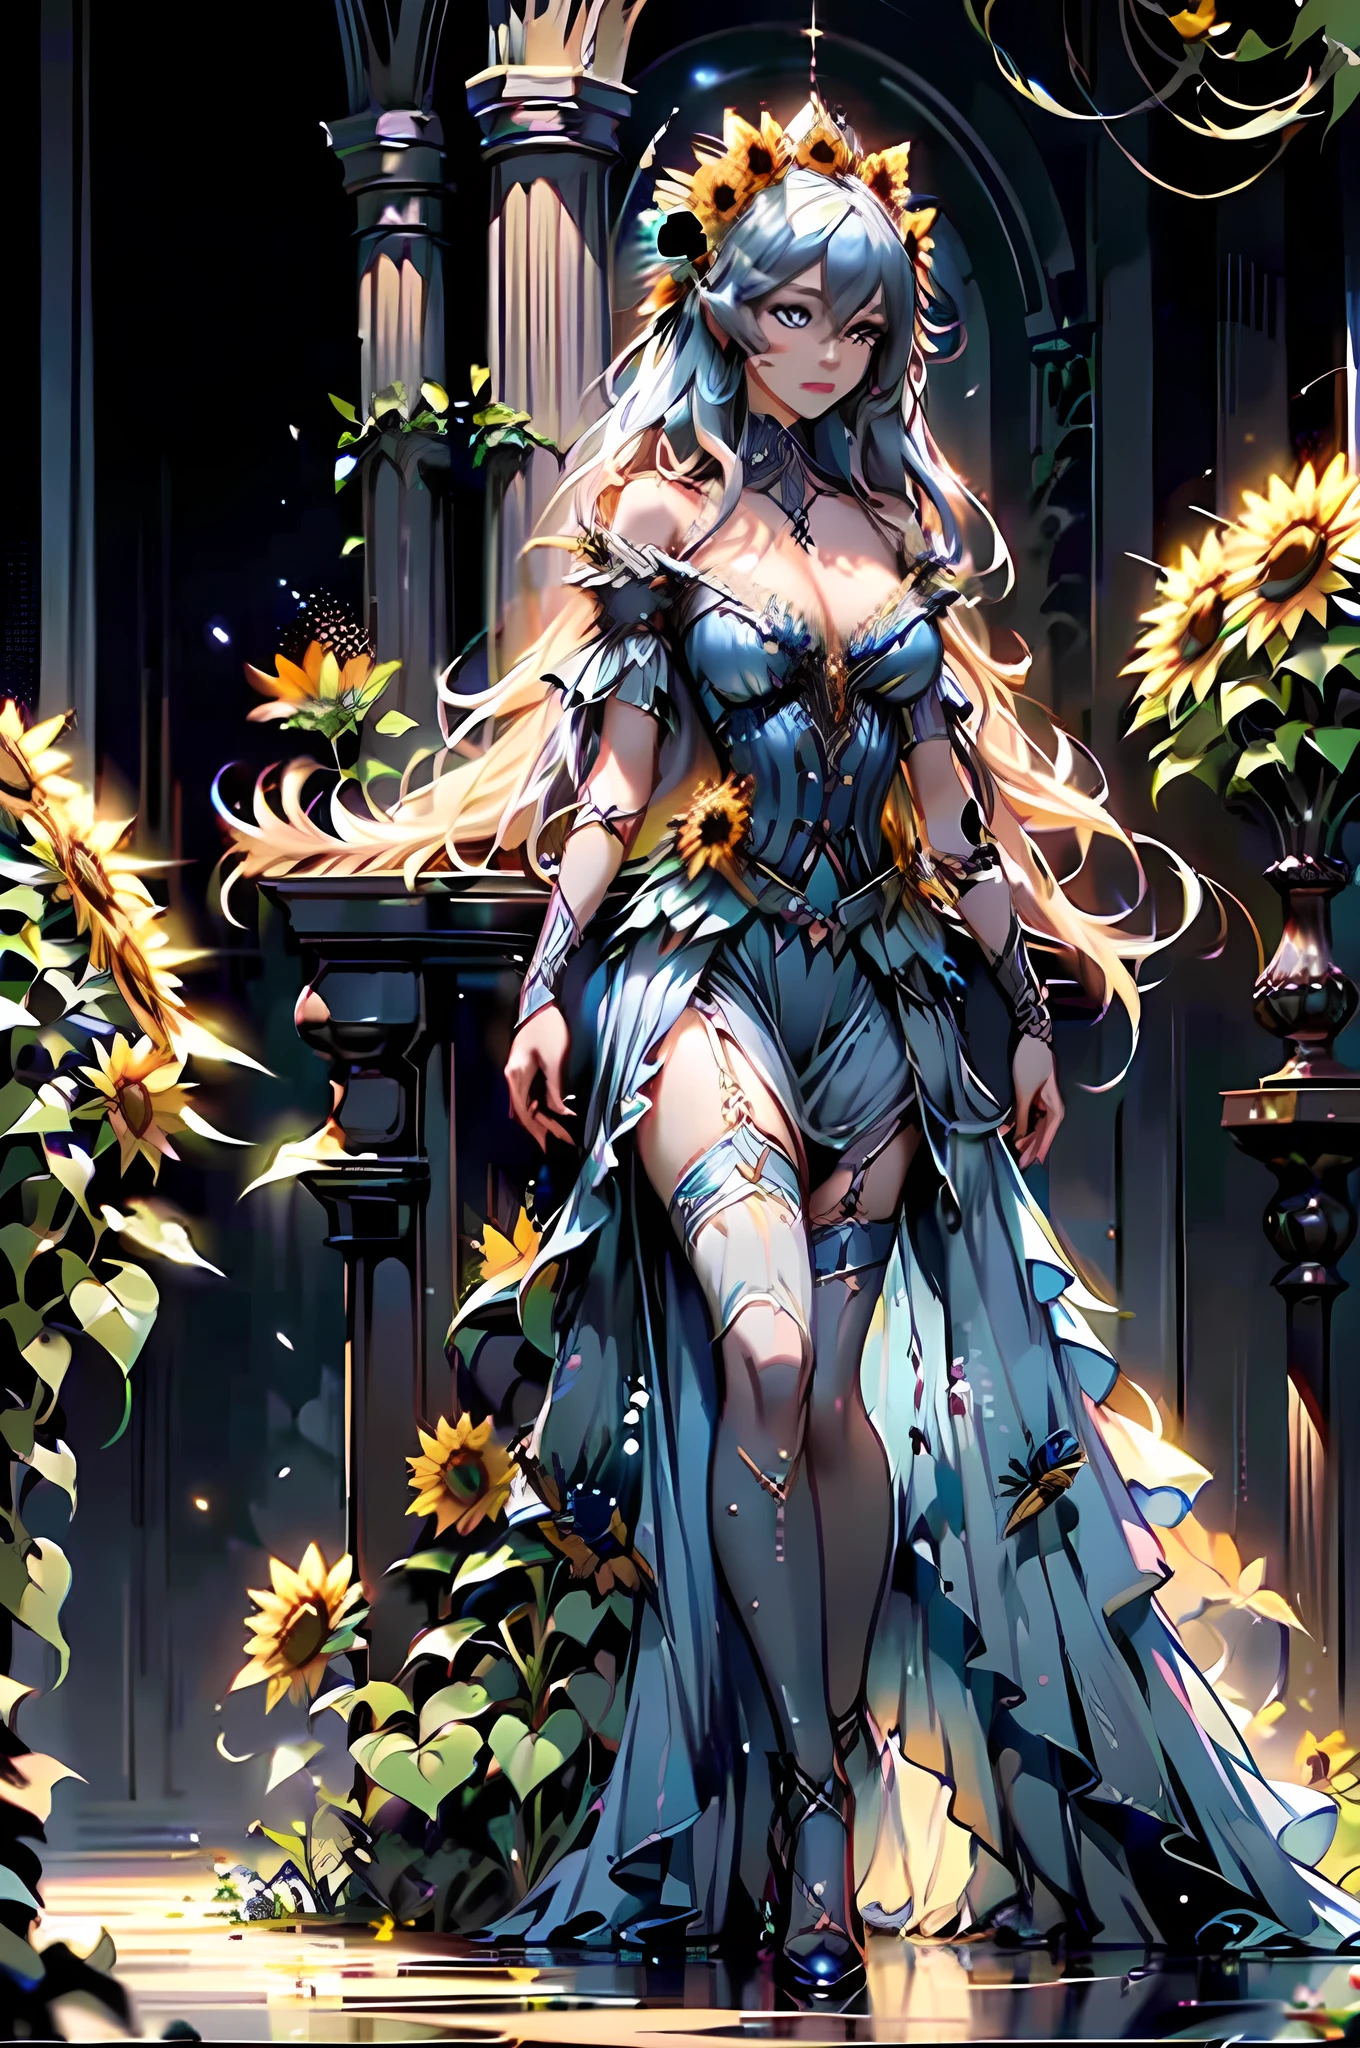 high details, best quality, 16k, RAW, [best detailed], masterpiece, best quality, (extremely detailed), GlowingRunes_paleblue, full body, ultra wide shot, photorealistic, fantasy art, RPG art, D&D art, a picture of a fairy selling flowers in a florist shop, extremely beautiful fairy, ultra feminine (intense details, Masterpiece, best quality), (Blue: 1.3) butterfly wings (intense details, Masterpiece, best quality), blue and white wings (intense details, Masterpiece, best quality),  azure hair, pixie cut hair, shinning hair, flowing hair, shy smile, innocent smile, blue eyes, wearing bright blue skirt, dynamic elegant shirt, chocker, wearing high heels, in flower shop (intense details, Masterpiece, best quality), extreme many (sunflowers: 1.3) (intense details, Masterpiece, best quality), sunflower shop in a modern era street, High Detail, Ultra High Quality, High Resolution, 16K Resolution, Ultra HD Pictures, Ultra Realistic, Clear Details, Realistic Detail, Ultra High Definition